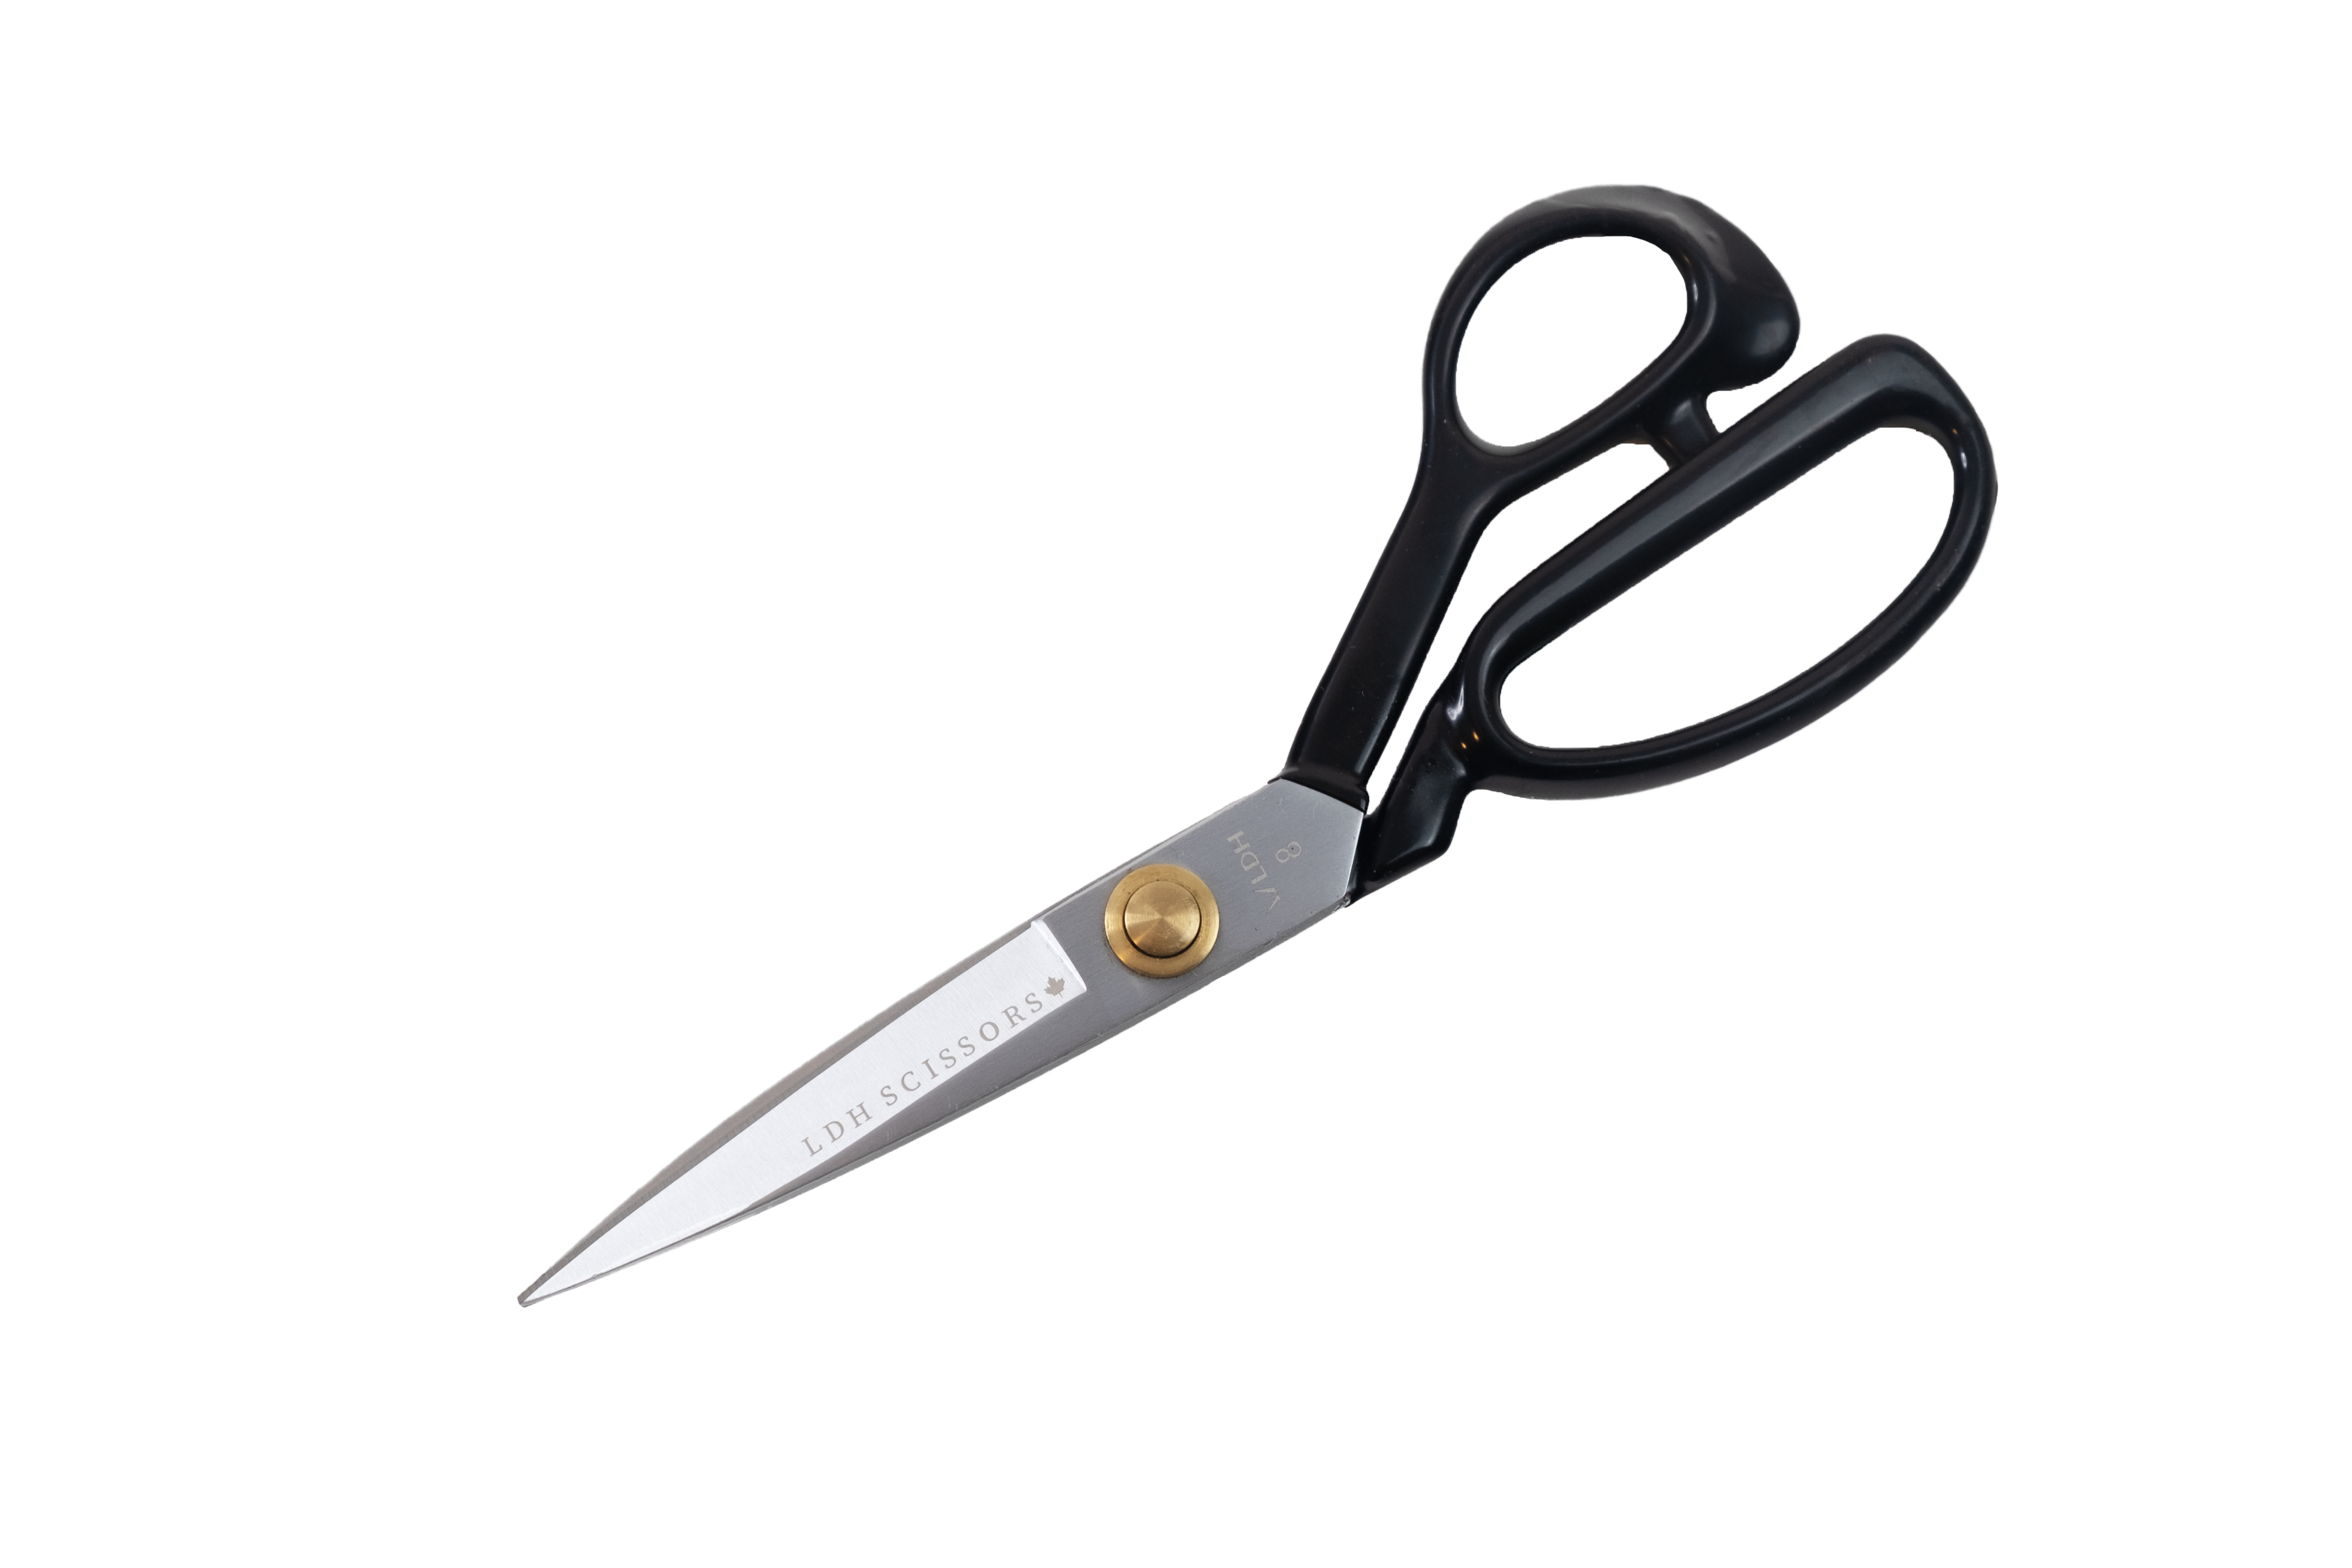 Personalized Left-handed Fabric Scissors With Engraving 10/25 Cm